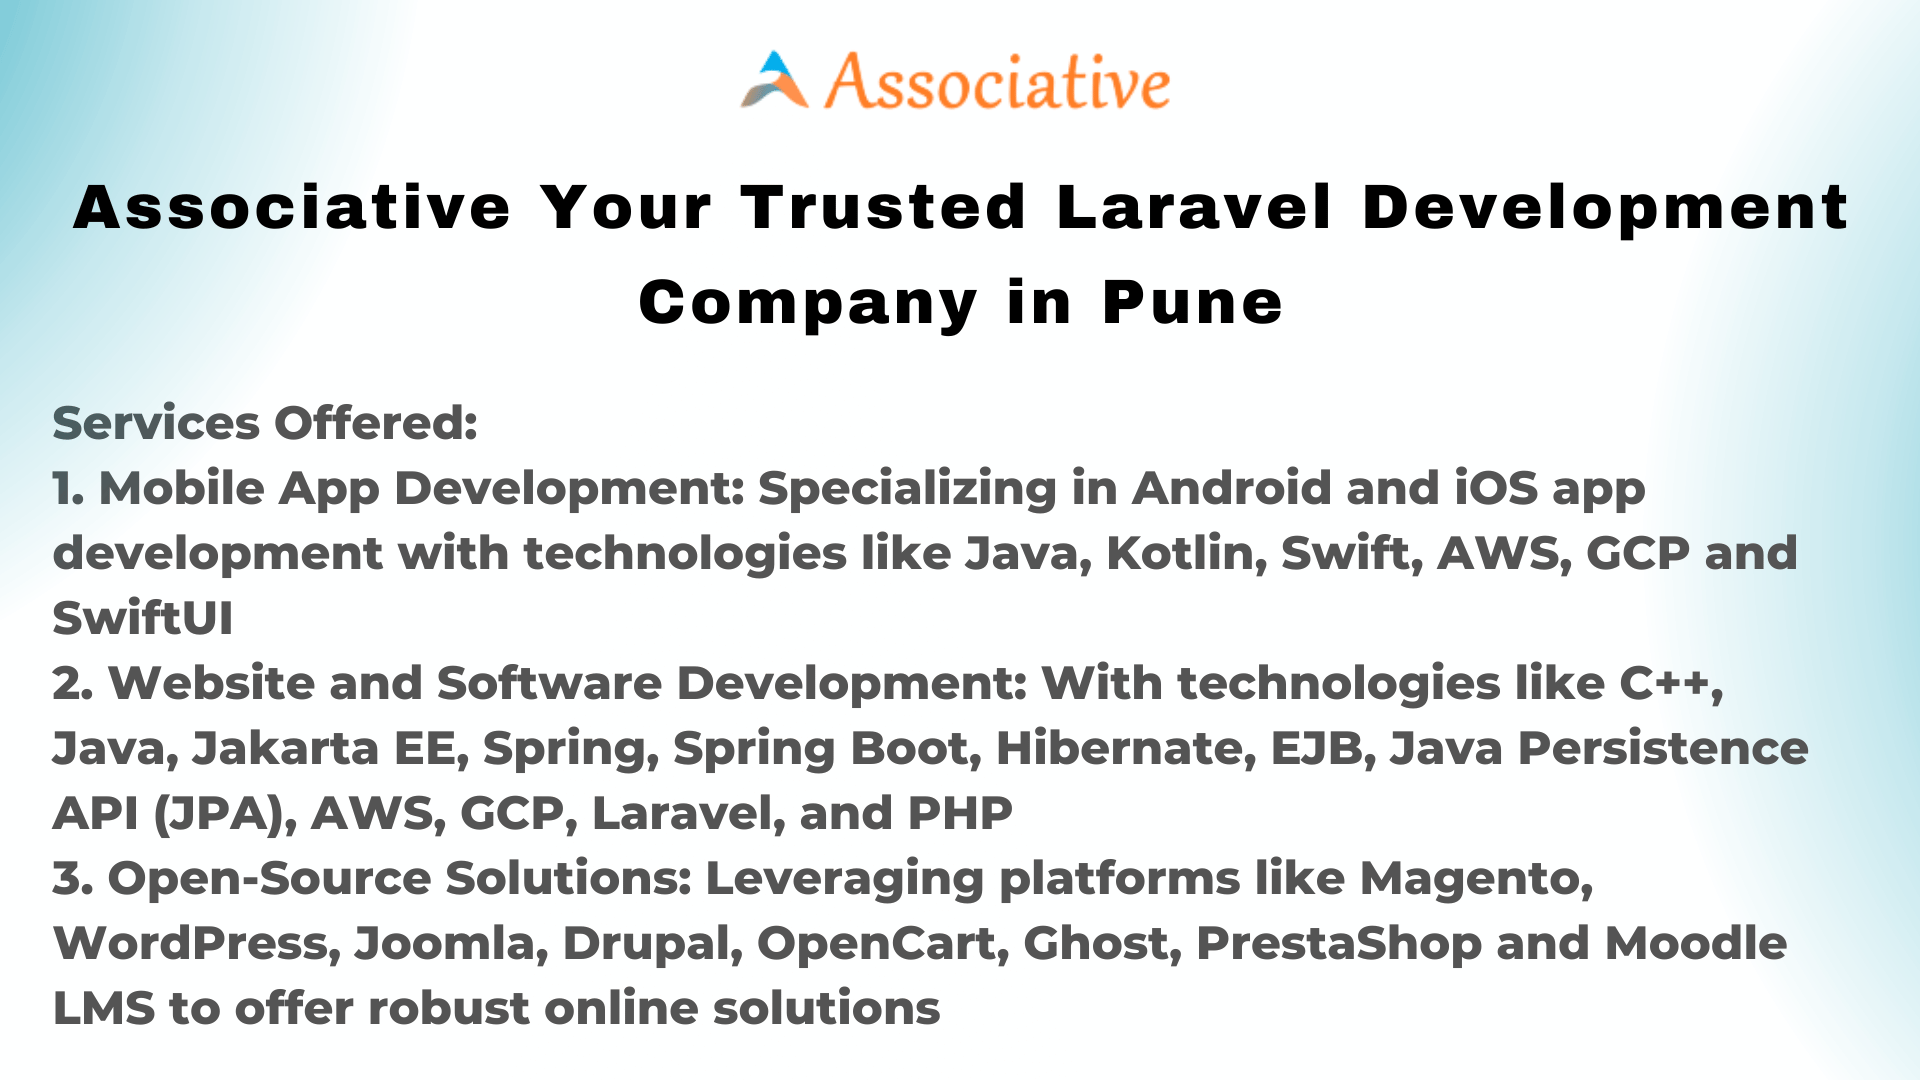 Associative Your Trusted Laravel Development Company in Pune